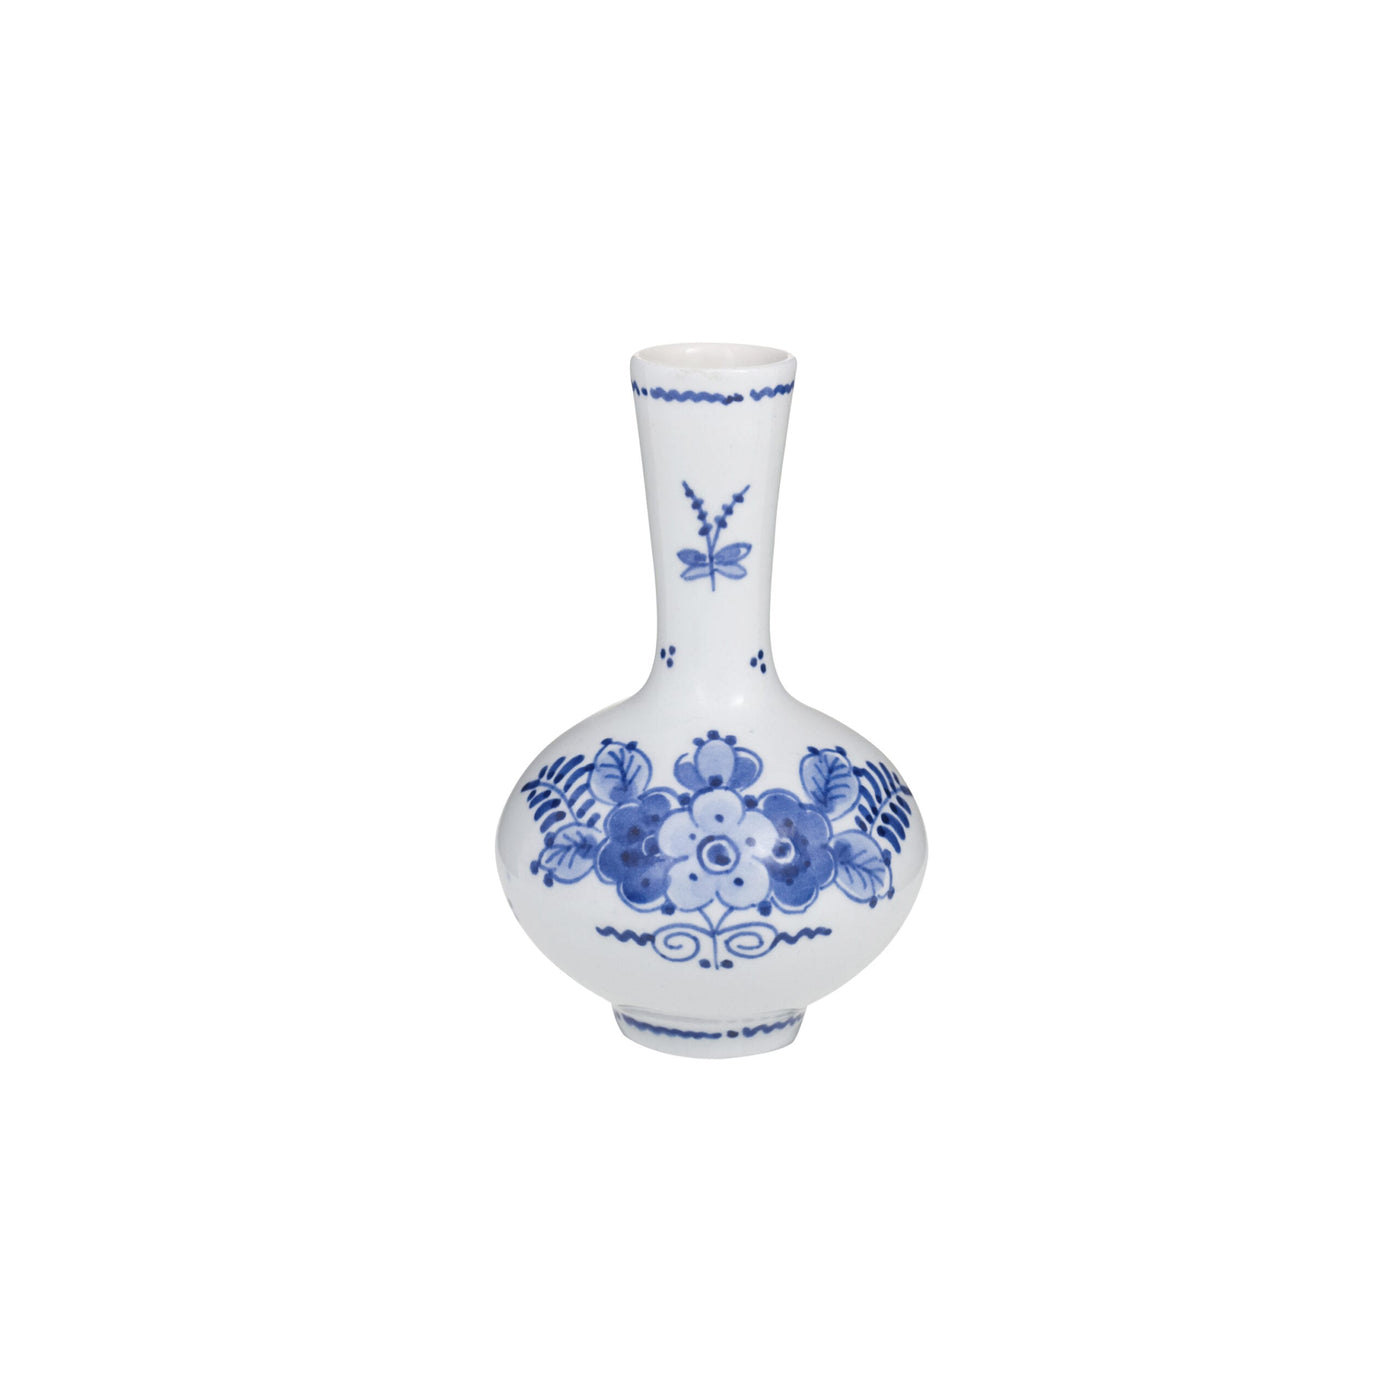 Delft Blue Hand-Painted Small Vase